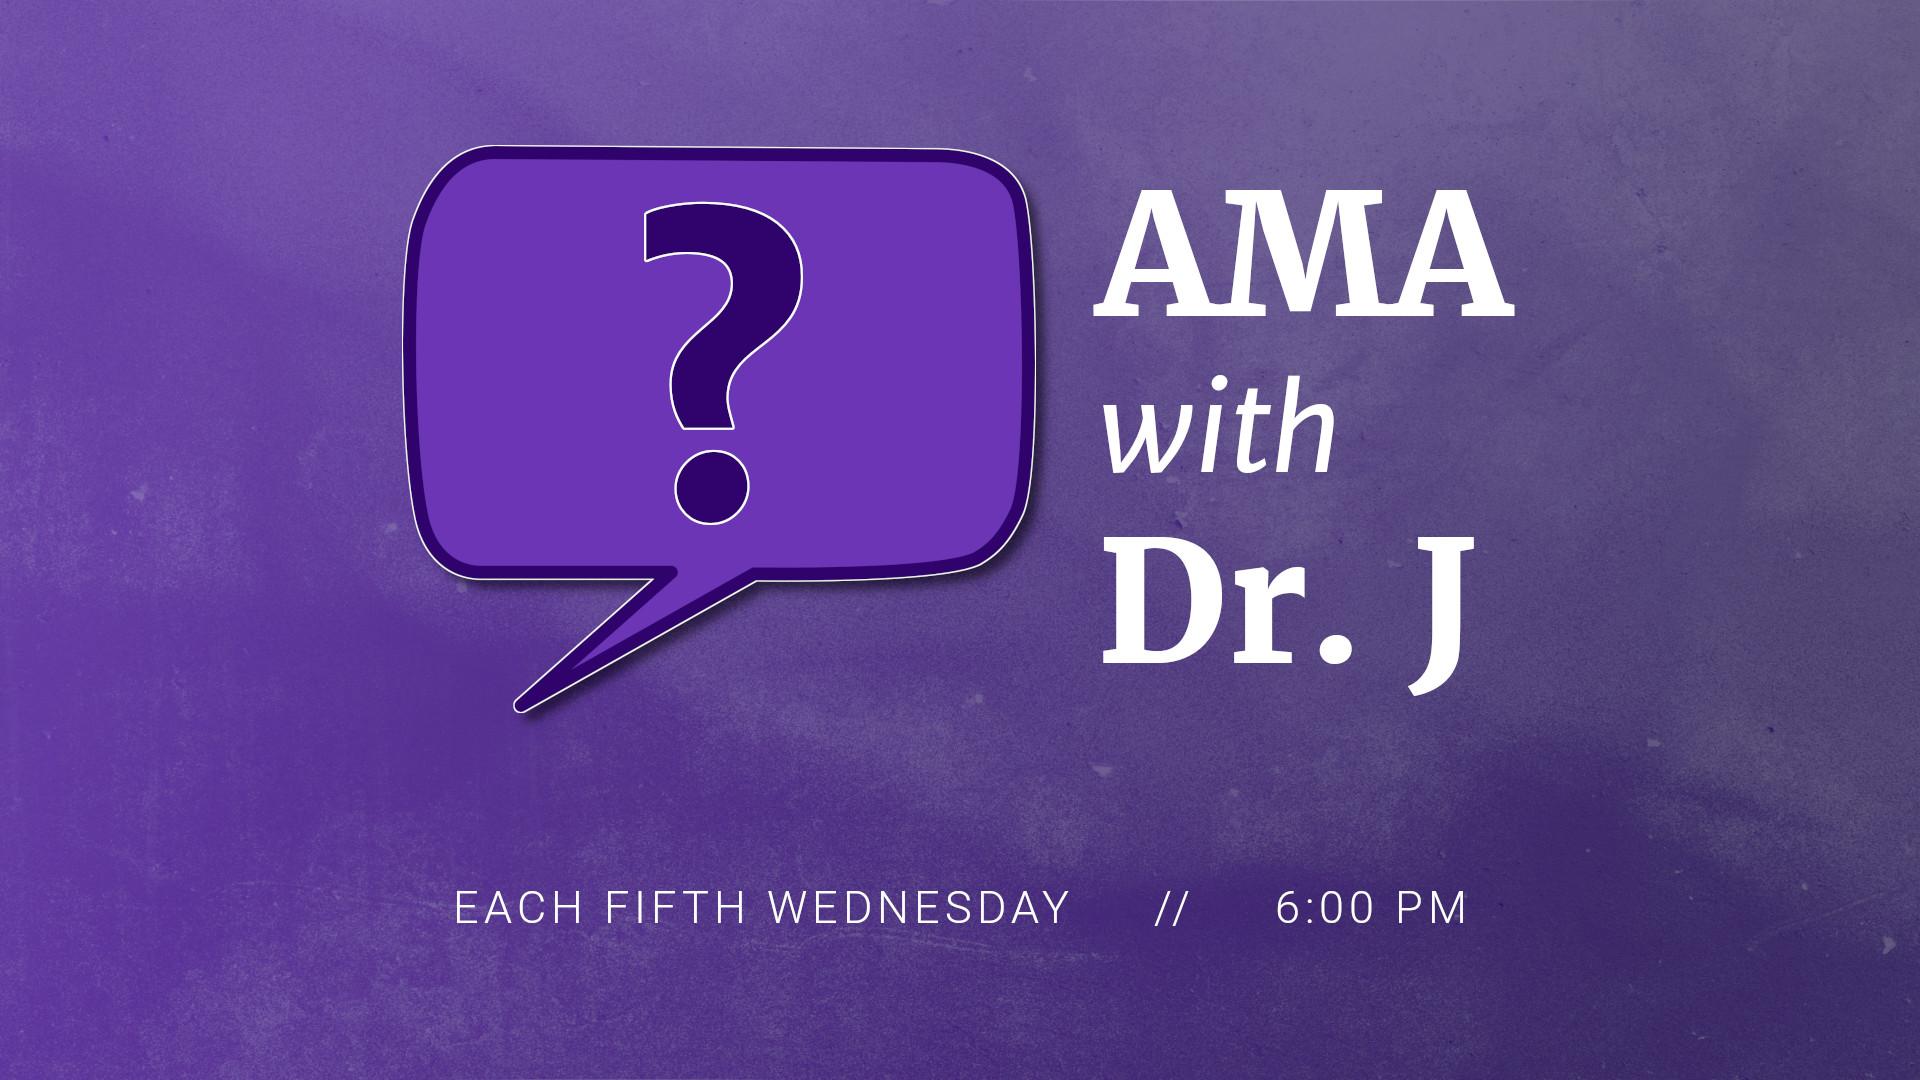 Ask Me Anything (AMA) with Dr. J